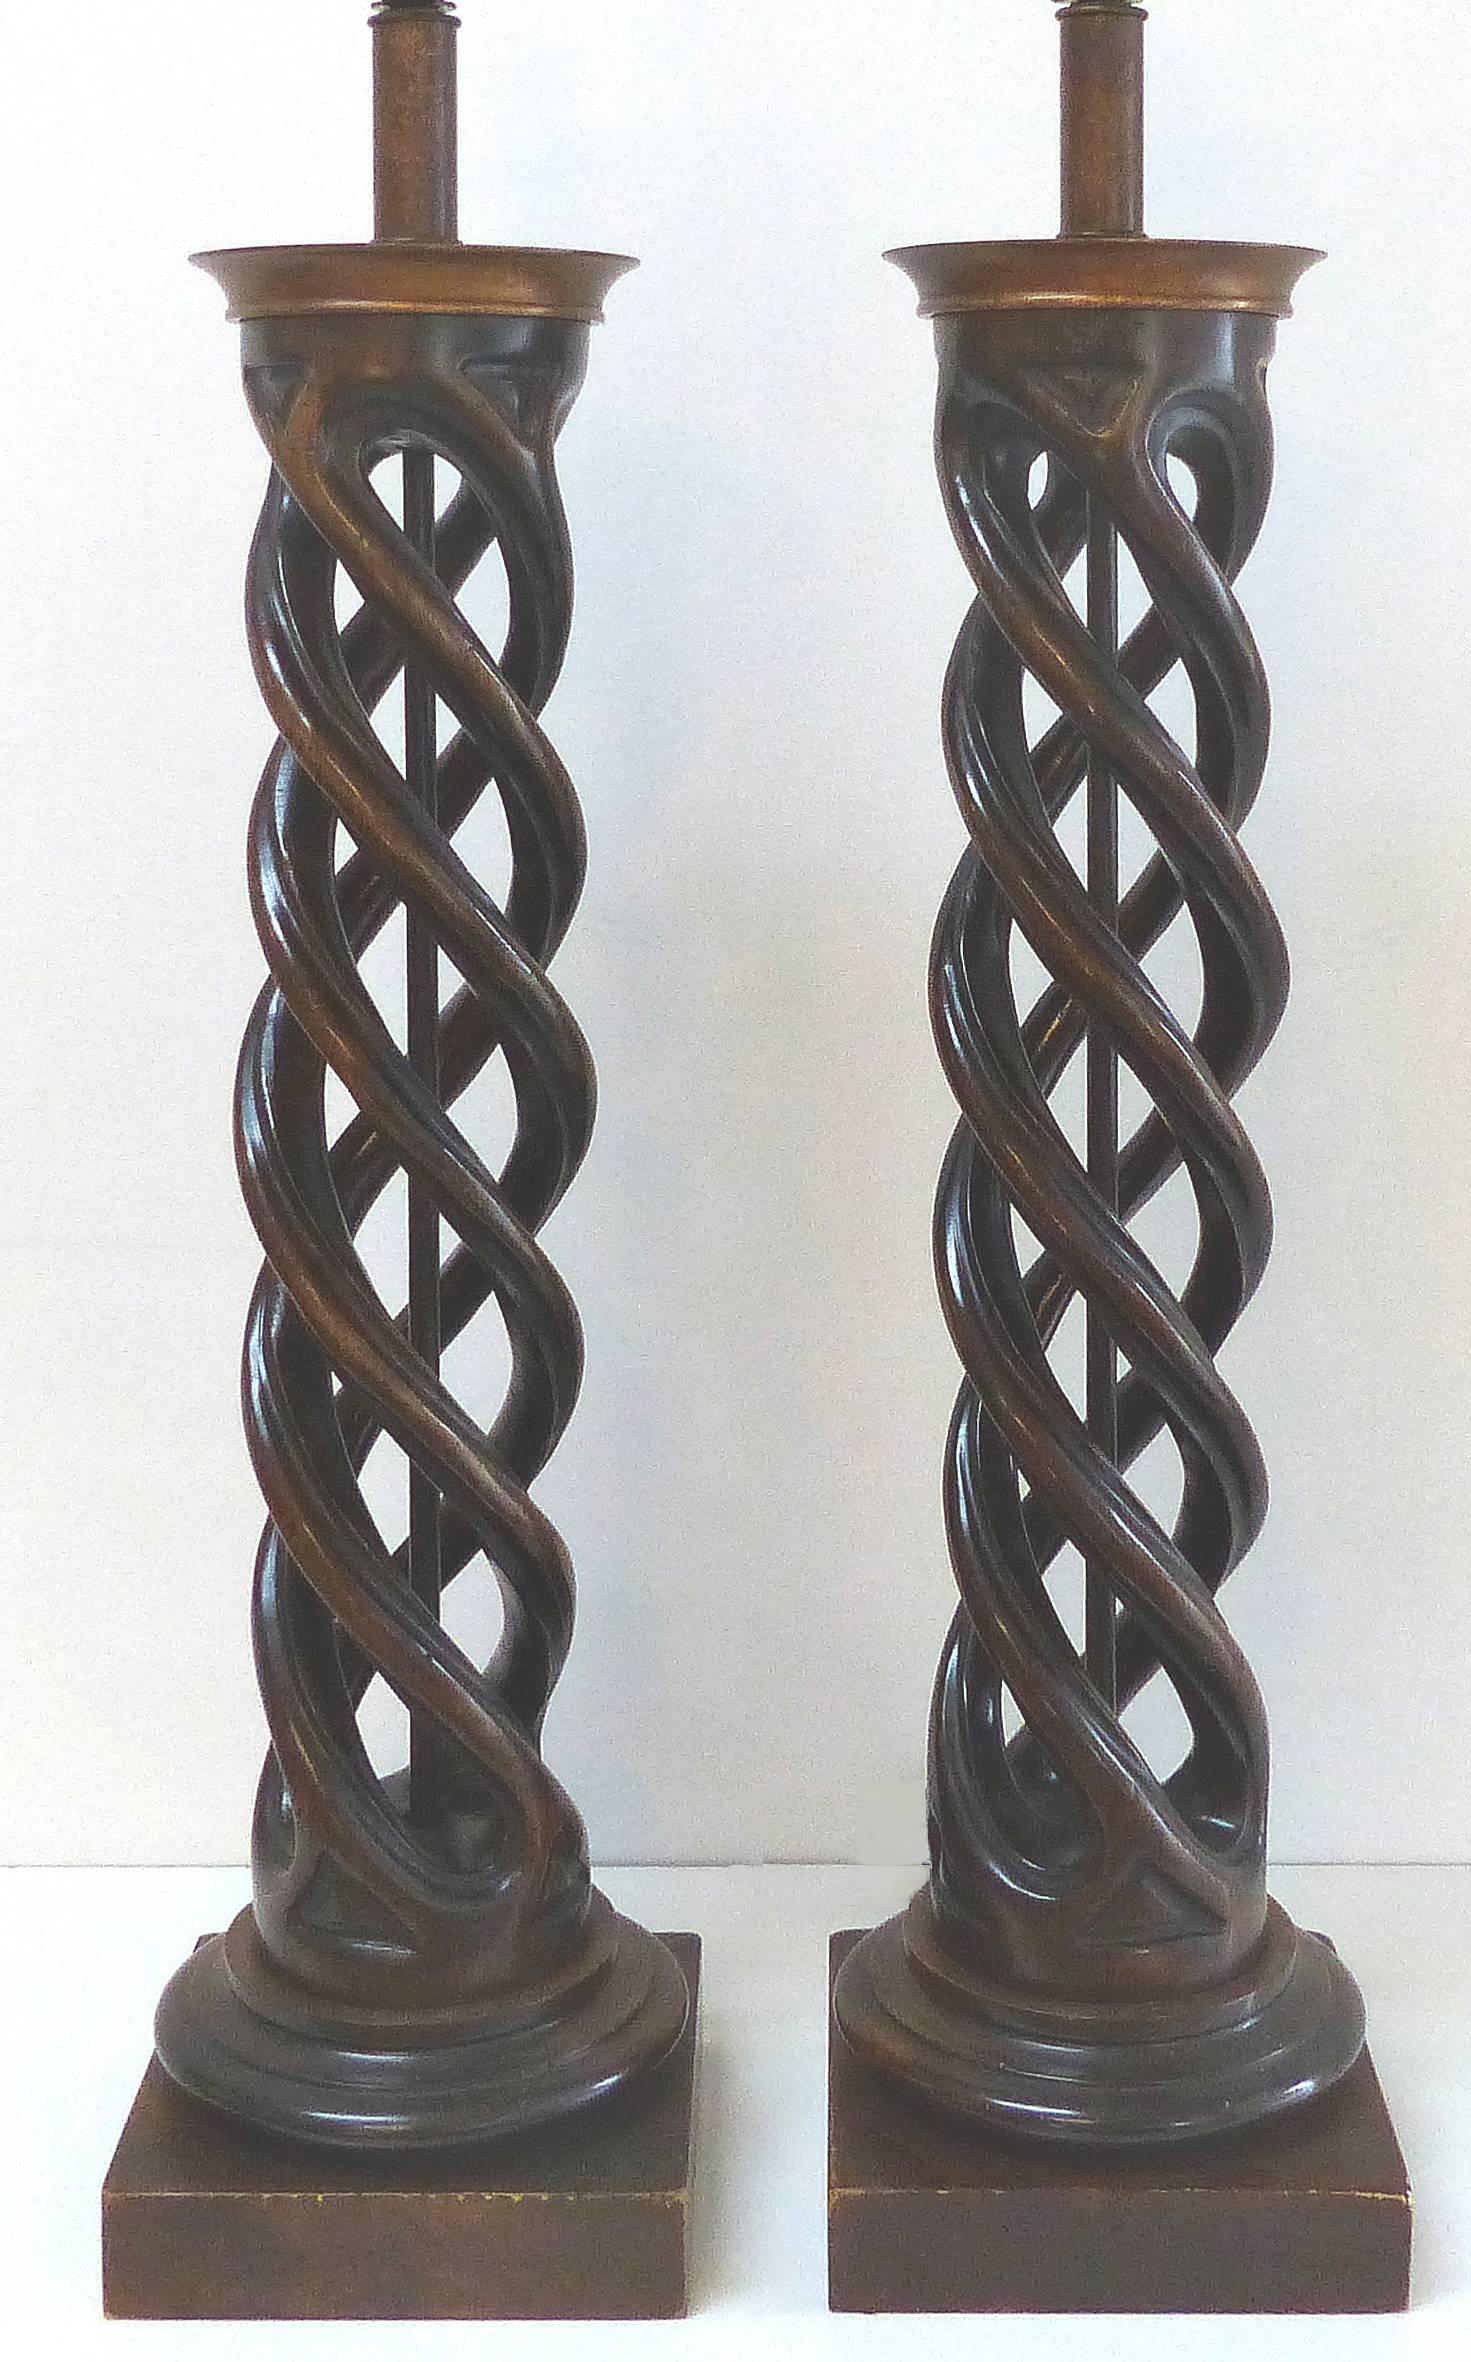 James Mont for Frederick Cooper Spiral Column Carved Wood Table Lamps, Pair

Offered for sale is a pair of hand-carved wooden double helix spiral column-form table lamps by James Mont lamps for Fredrick Cooper. The lamps are supported by 7